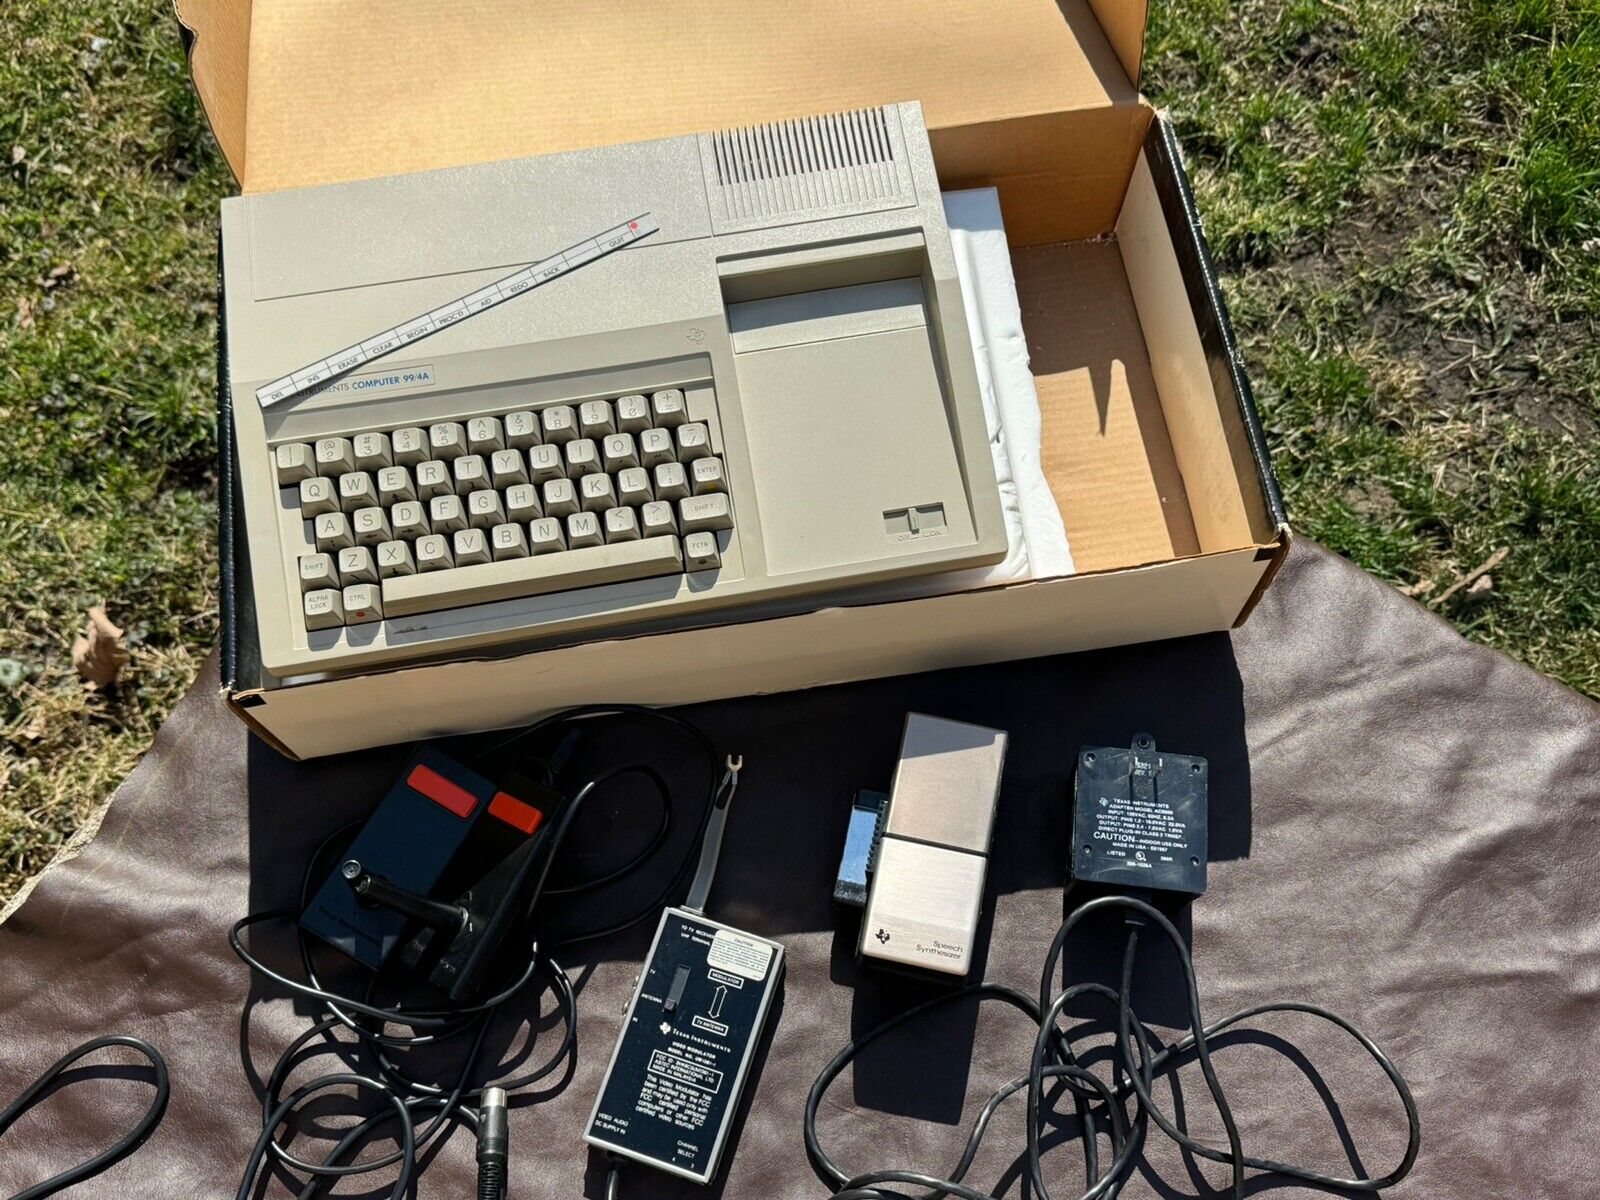 Texas Instruments Ti-99/4A Vintage 1983 Home Computer With Box